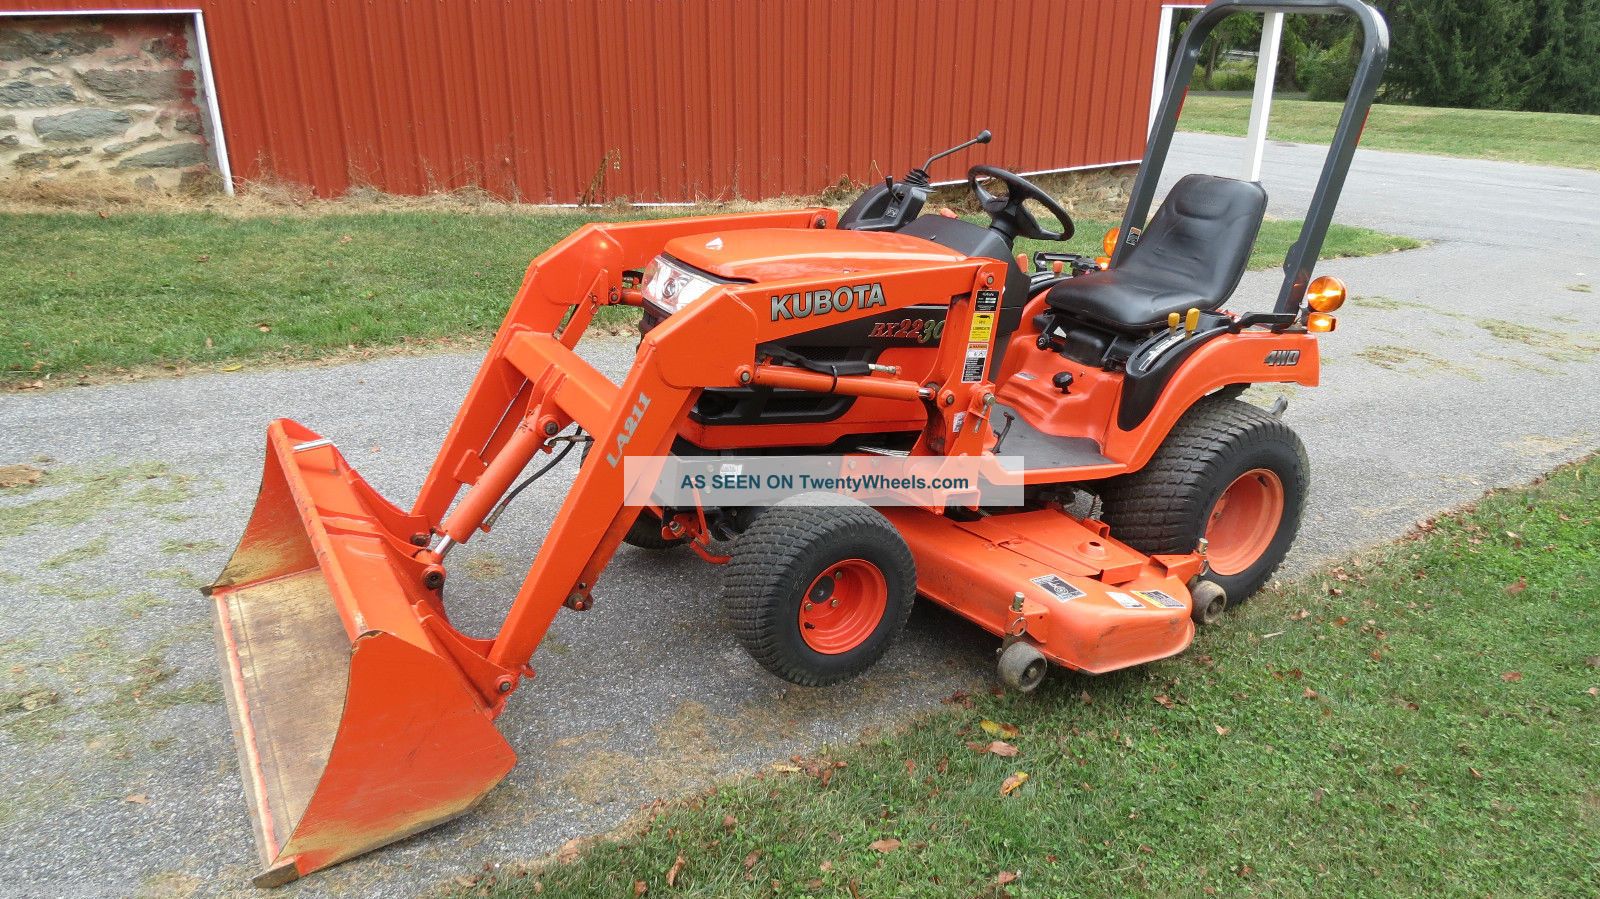 2004 Kubota Bx2230 4x4 Compact Tractor W/ Loader Belly Mower Hydro 647 ...